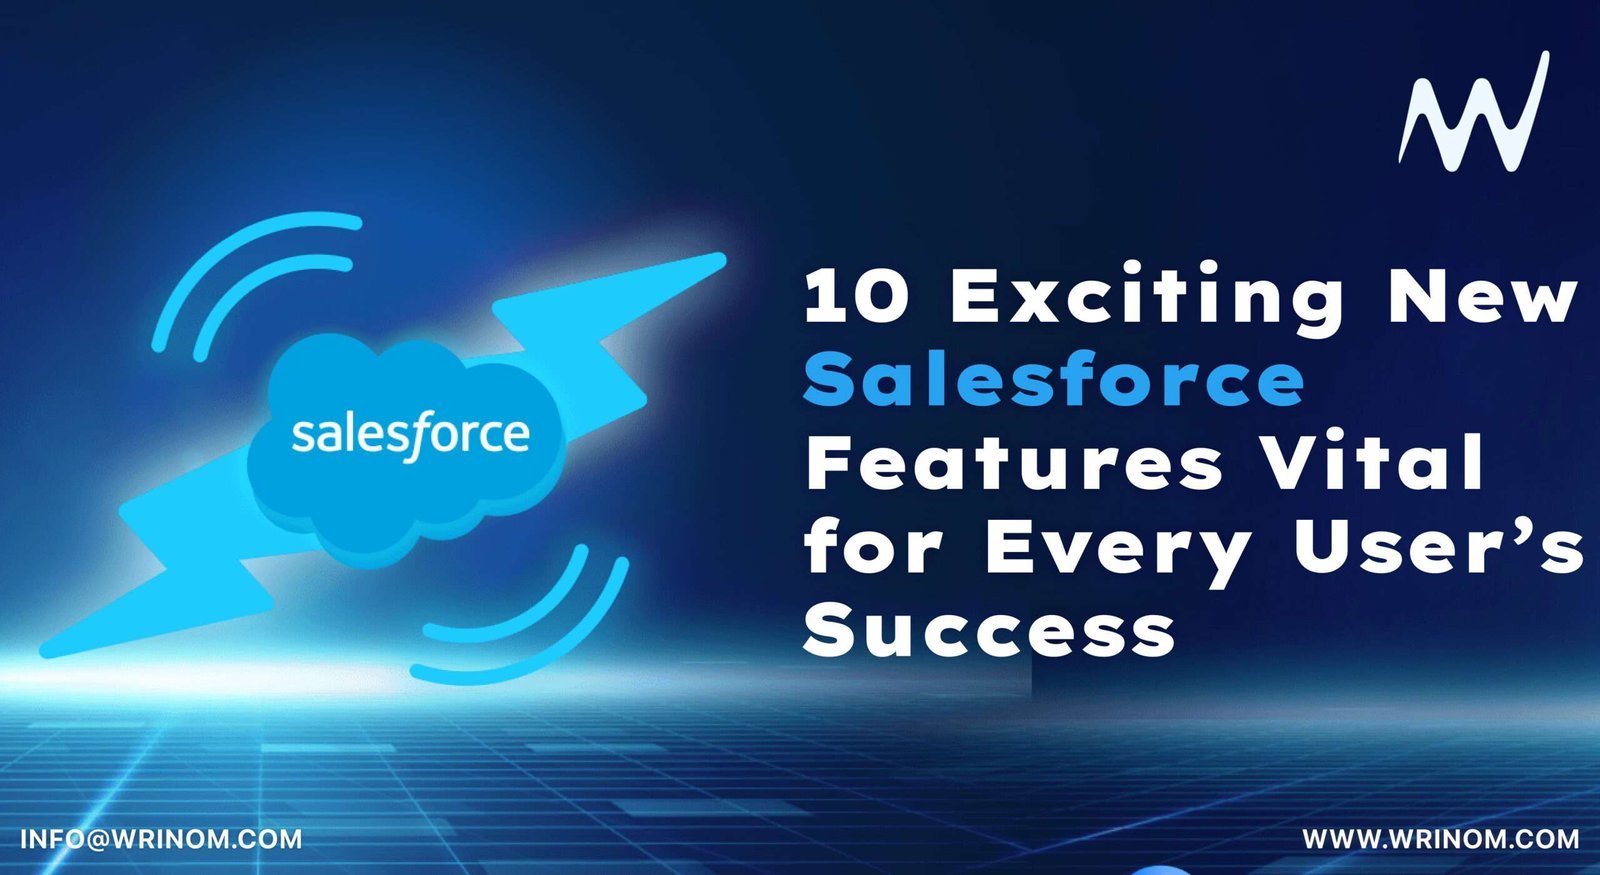 Boost Your Success: 10 New Salesforce Features IMG